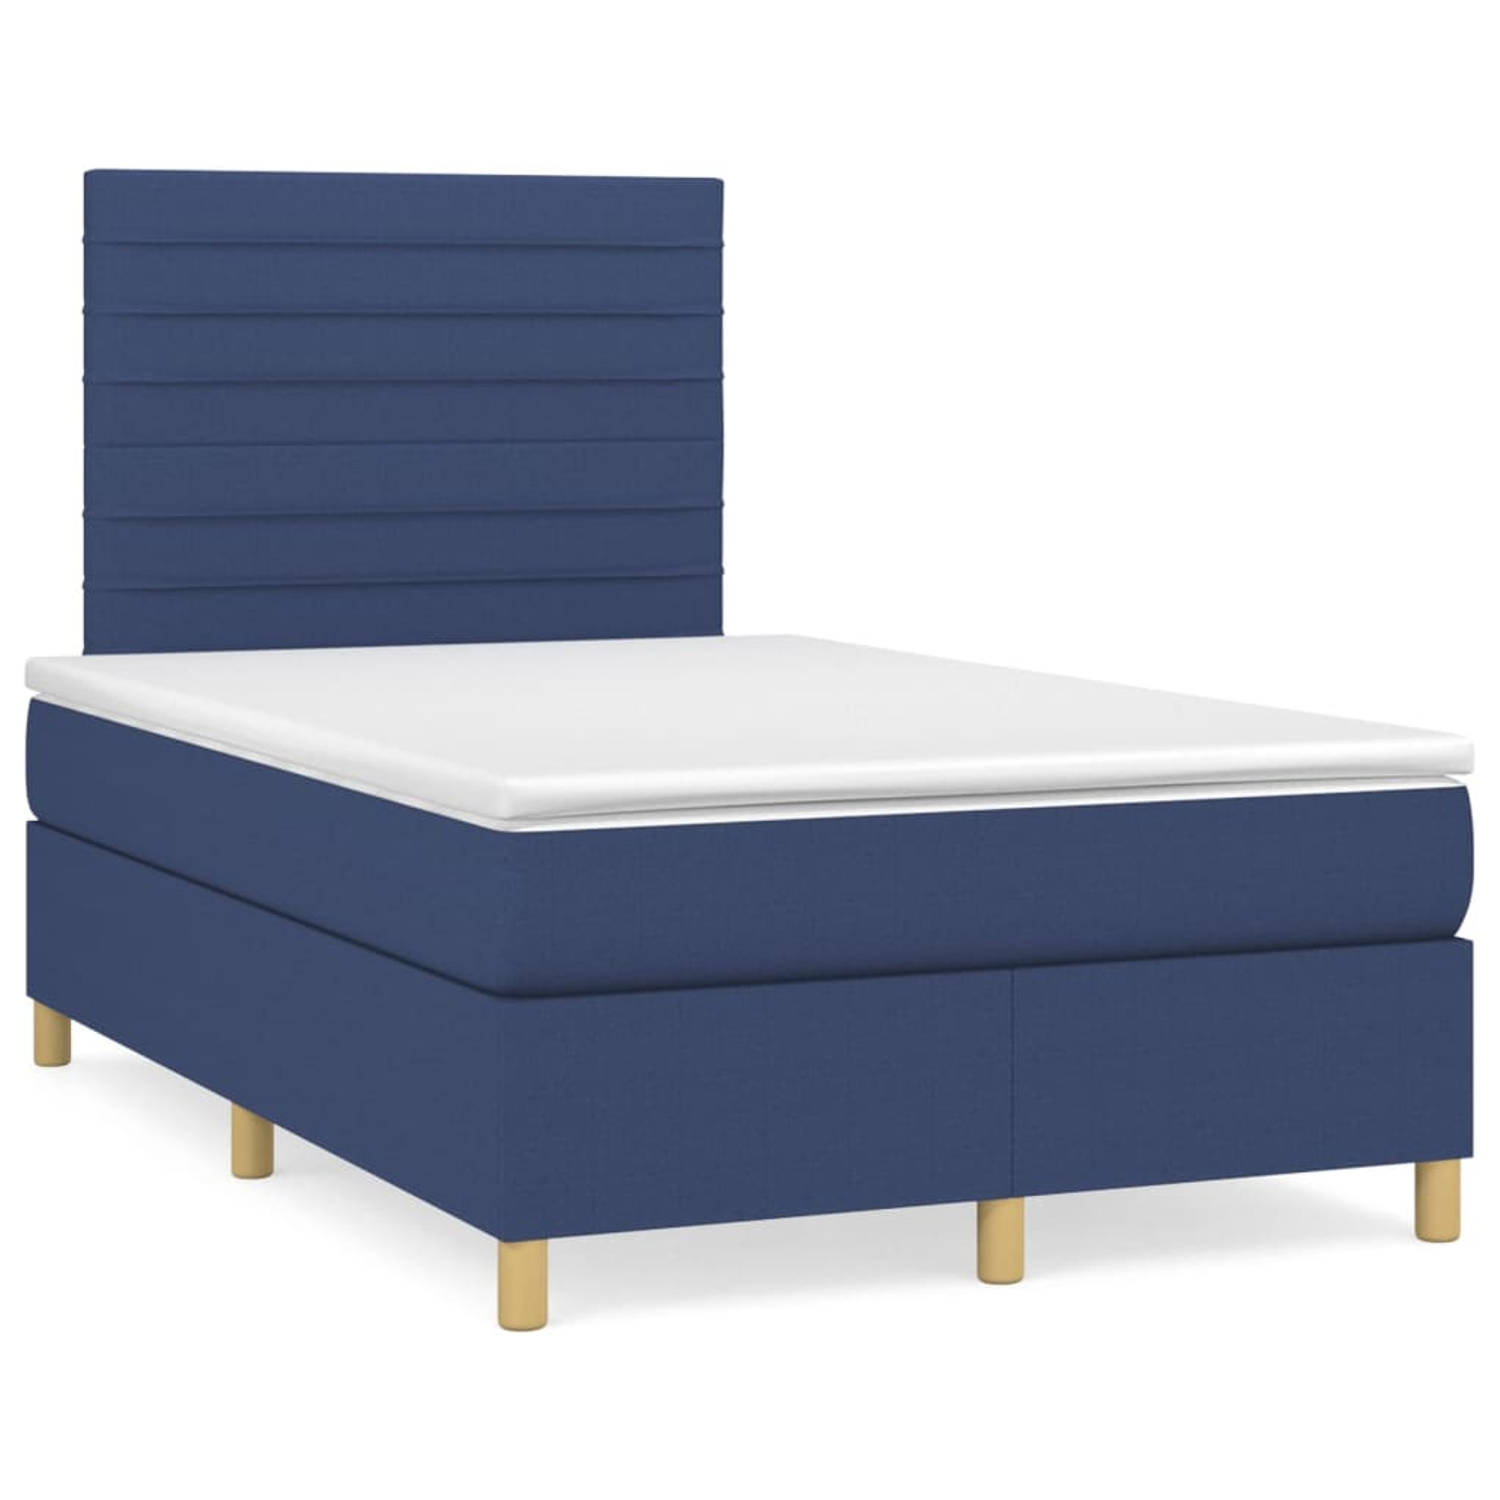 The Living Store Boxspringbed - - Bed - 203 x 120 x 118/128 cm - Blauw - Stof